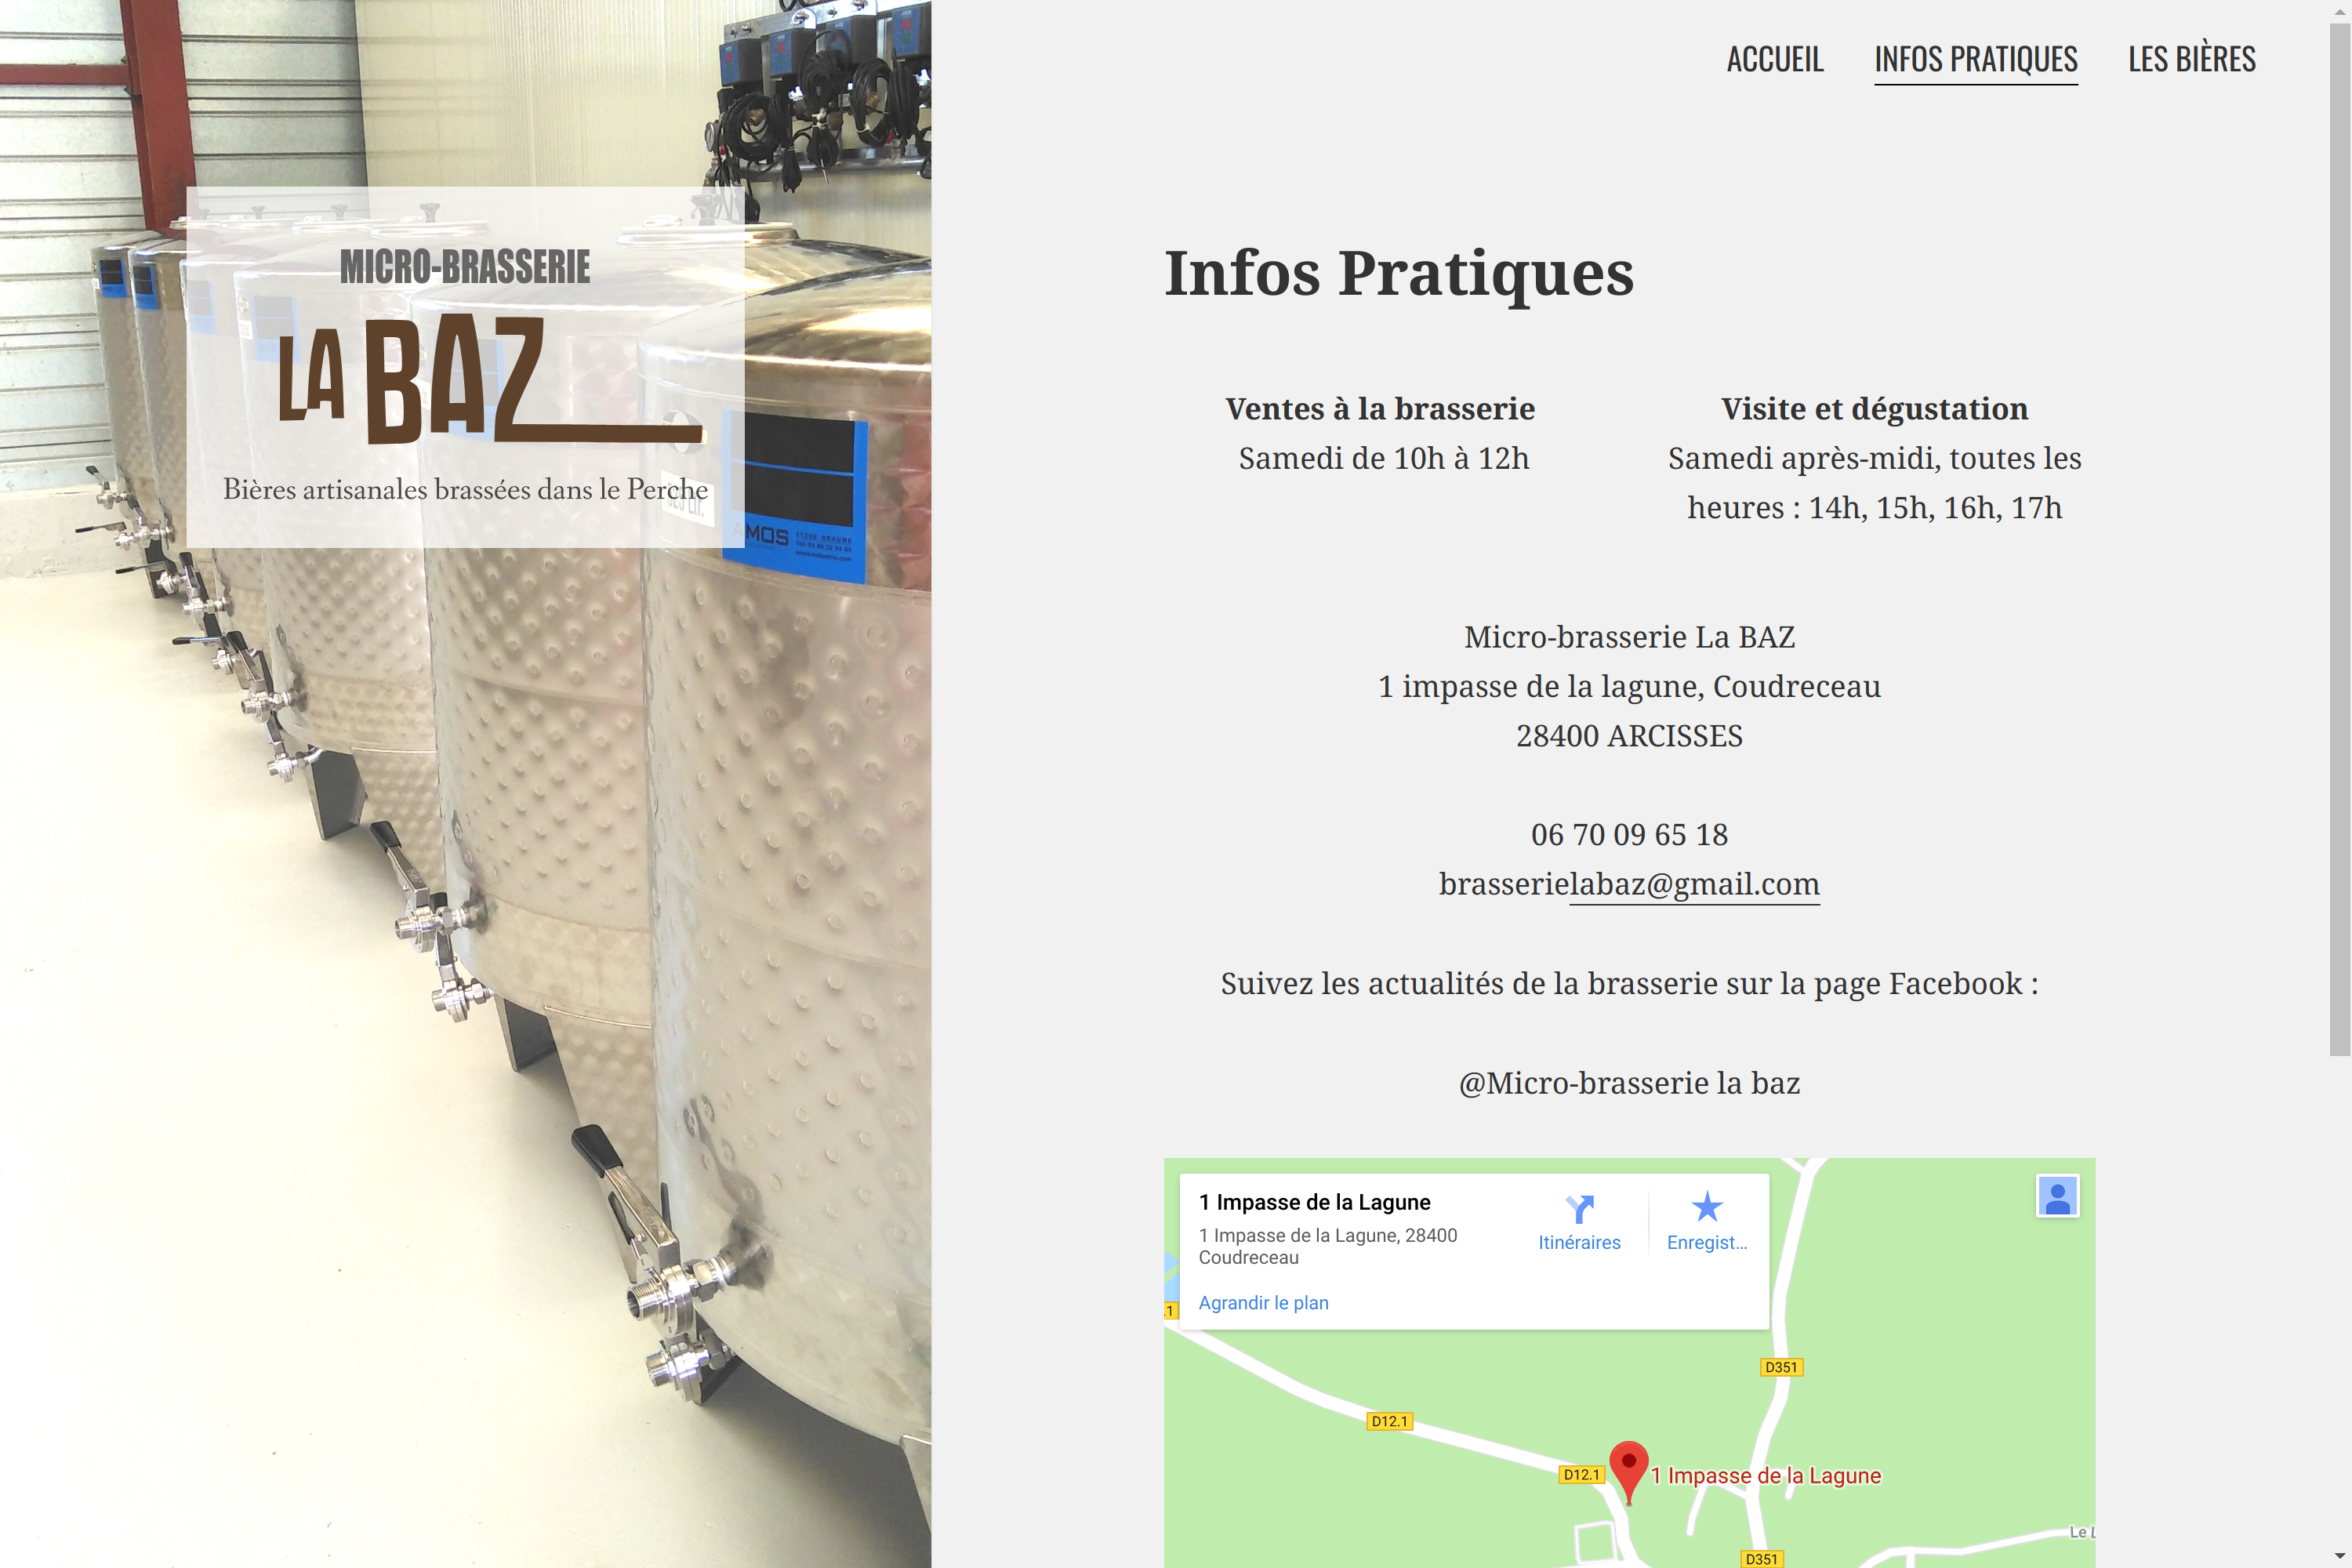 Website of the microbrewery "La Baz"